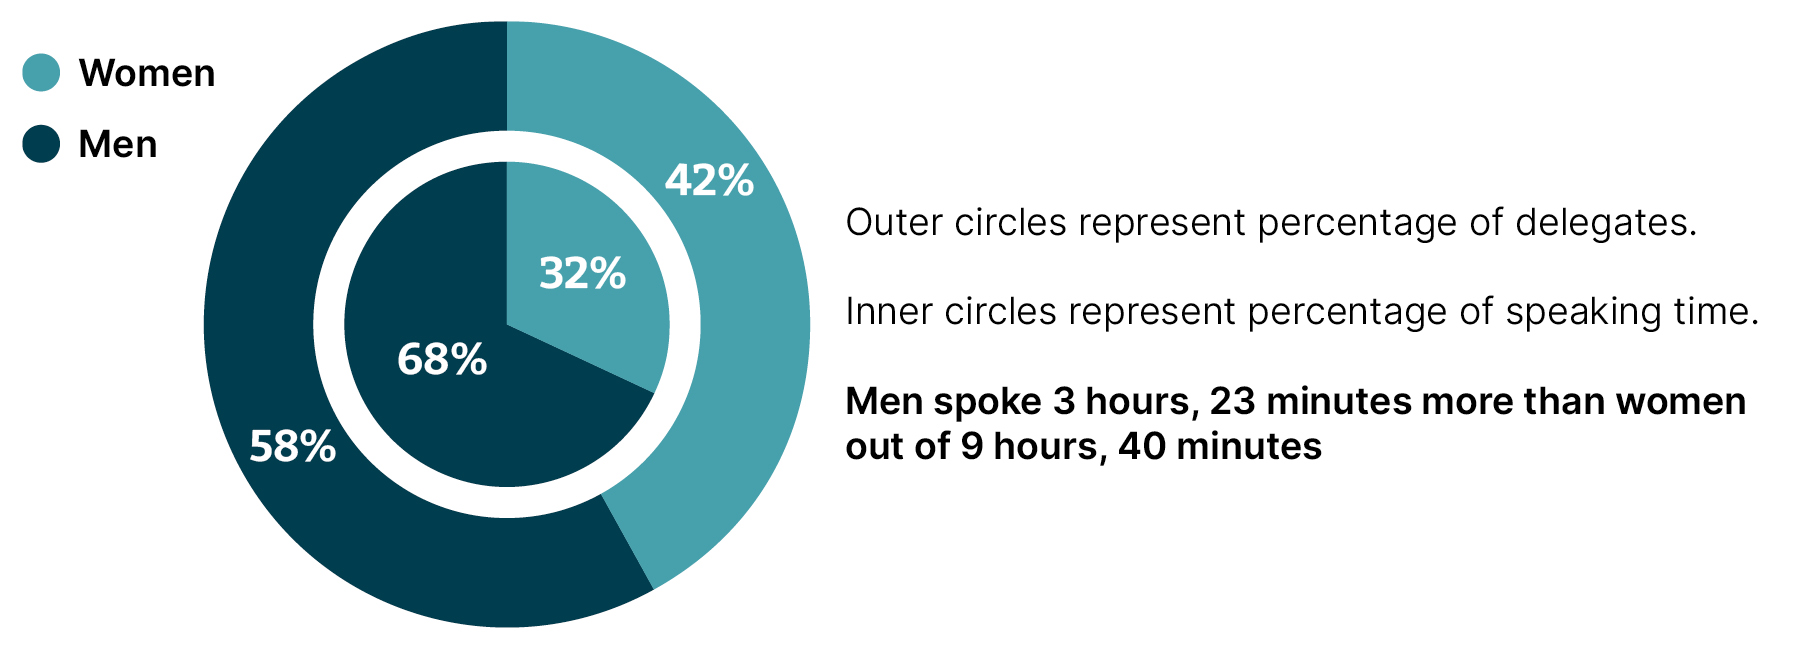 Pie chart shows that men spoke 68% and women spoke 32% of the time 